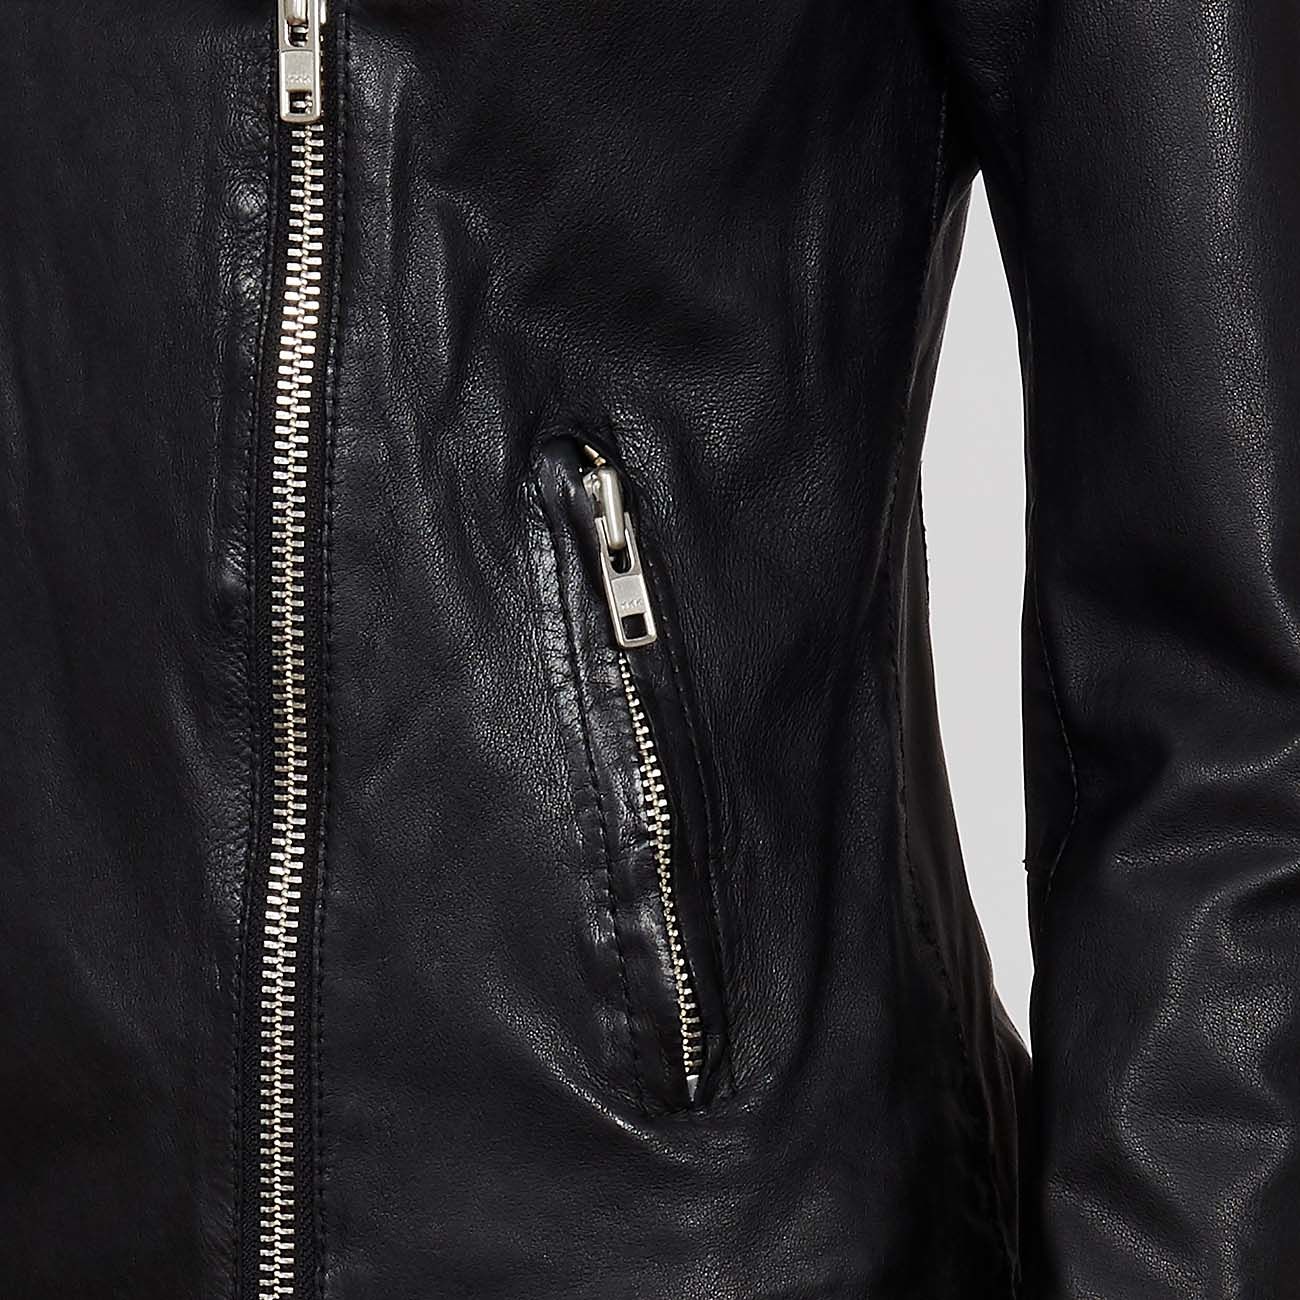 Double Breasted Leather Jacket Mens